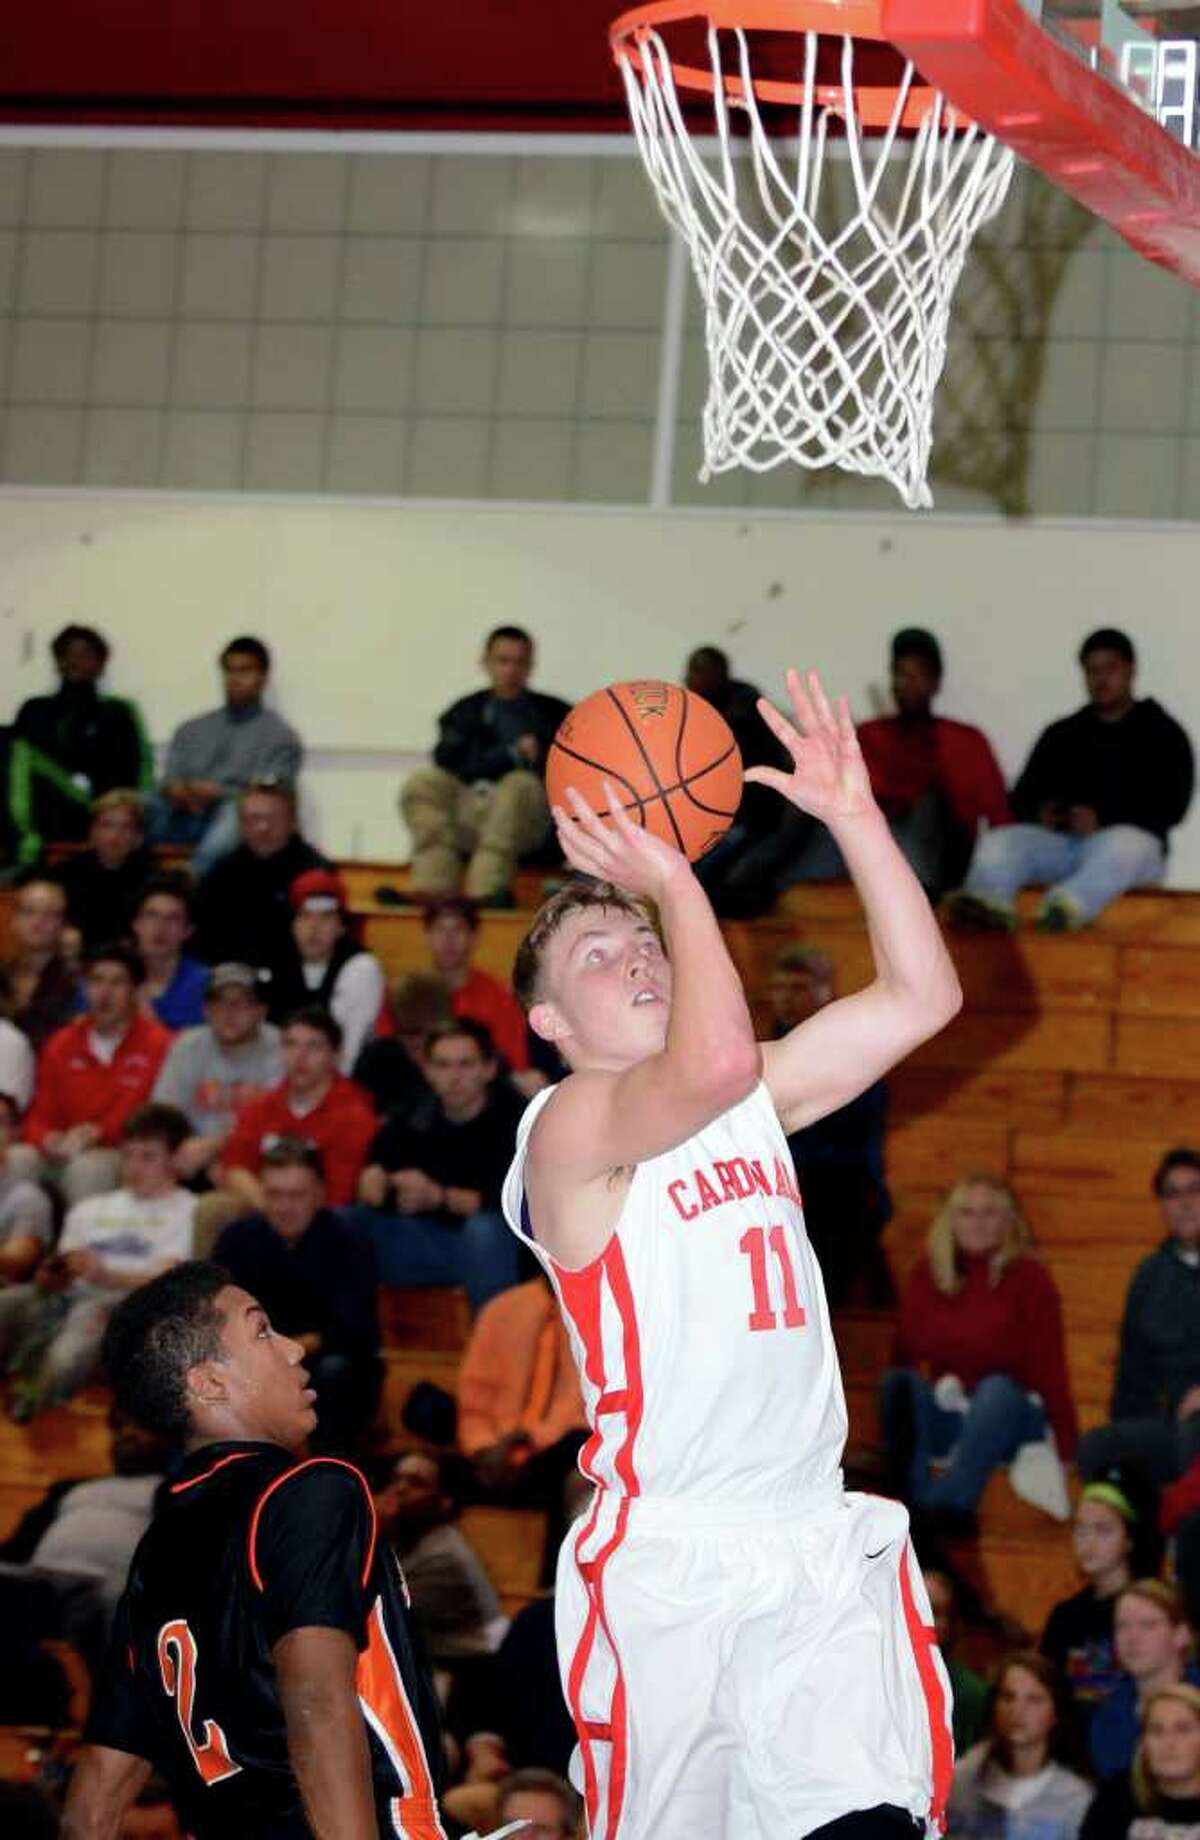 Greenwich's Alex McMurray (11) goes up for a shot during the boys basketball game against Stamford at Greenwich High School on Wednesday, Dec. 14, 2011.